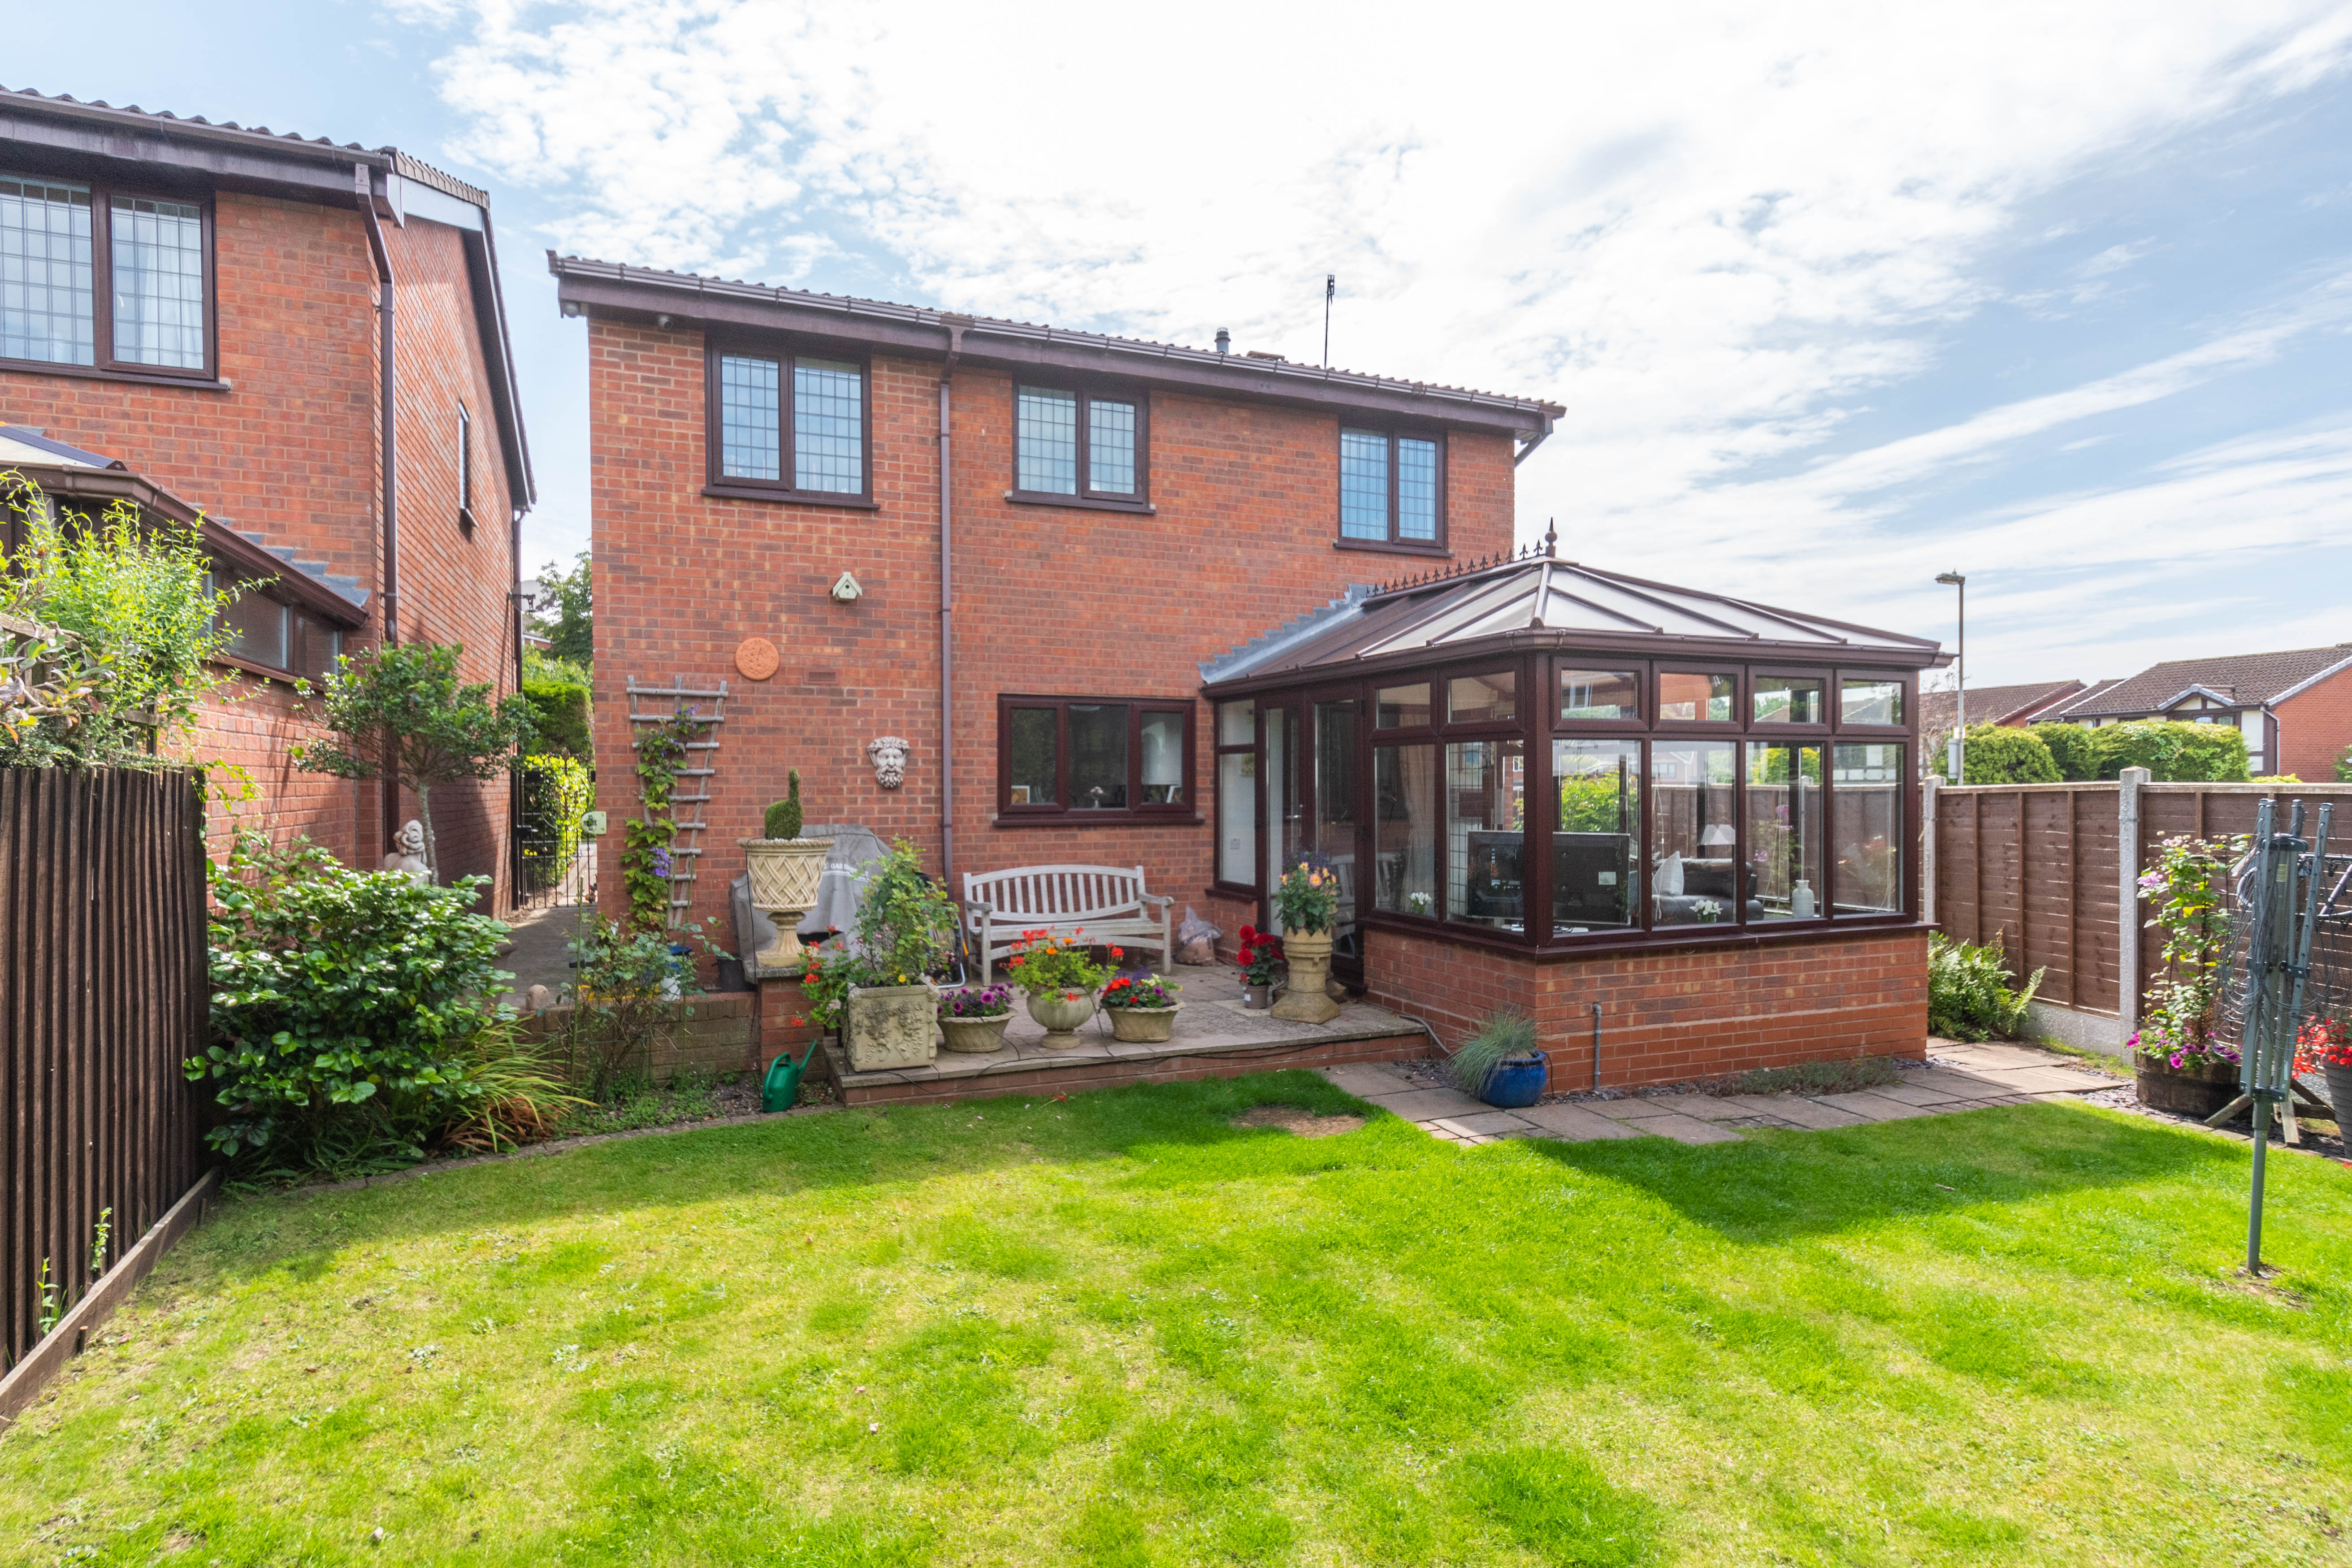 4 bed house for sale in Ashton Park Drive, Brierley Hill 21